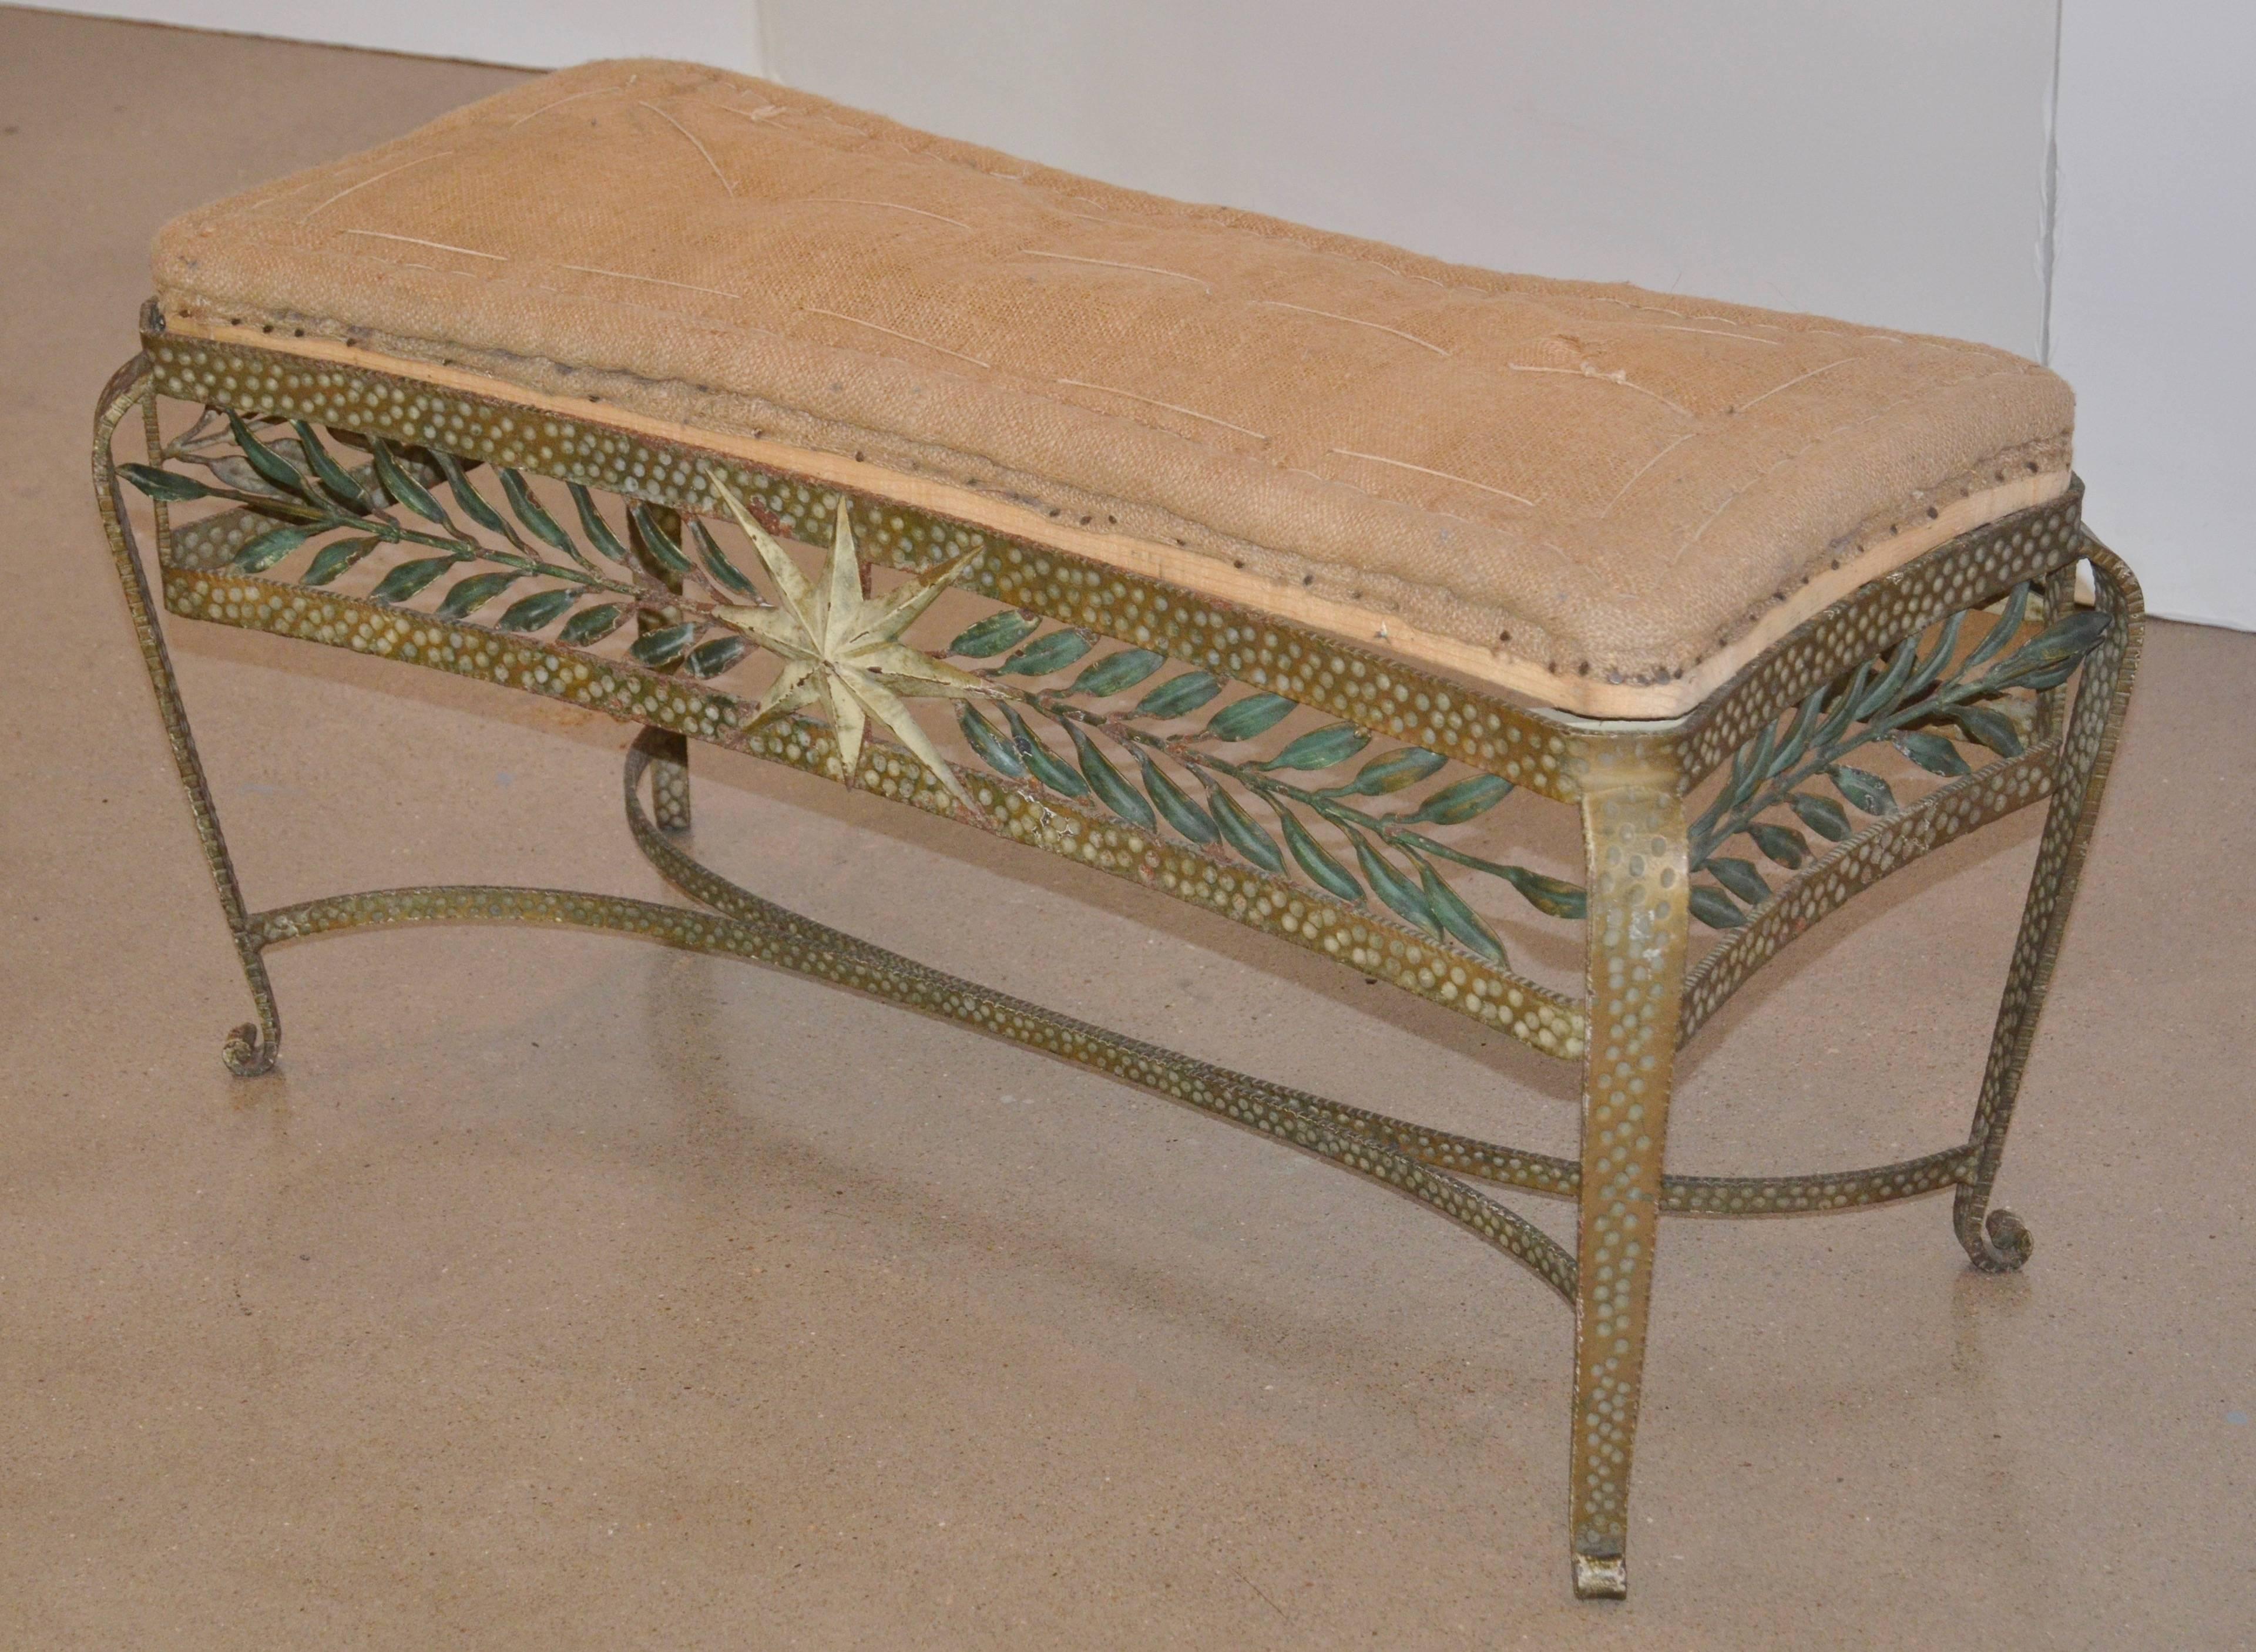 Steel Forged and Gilt Bench, Pierluigi Colli for Cristal Art, Italy, 1950